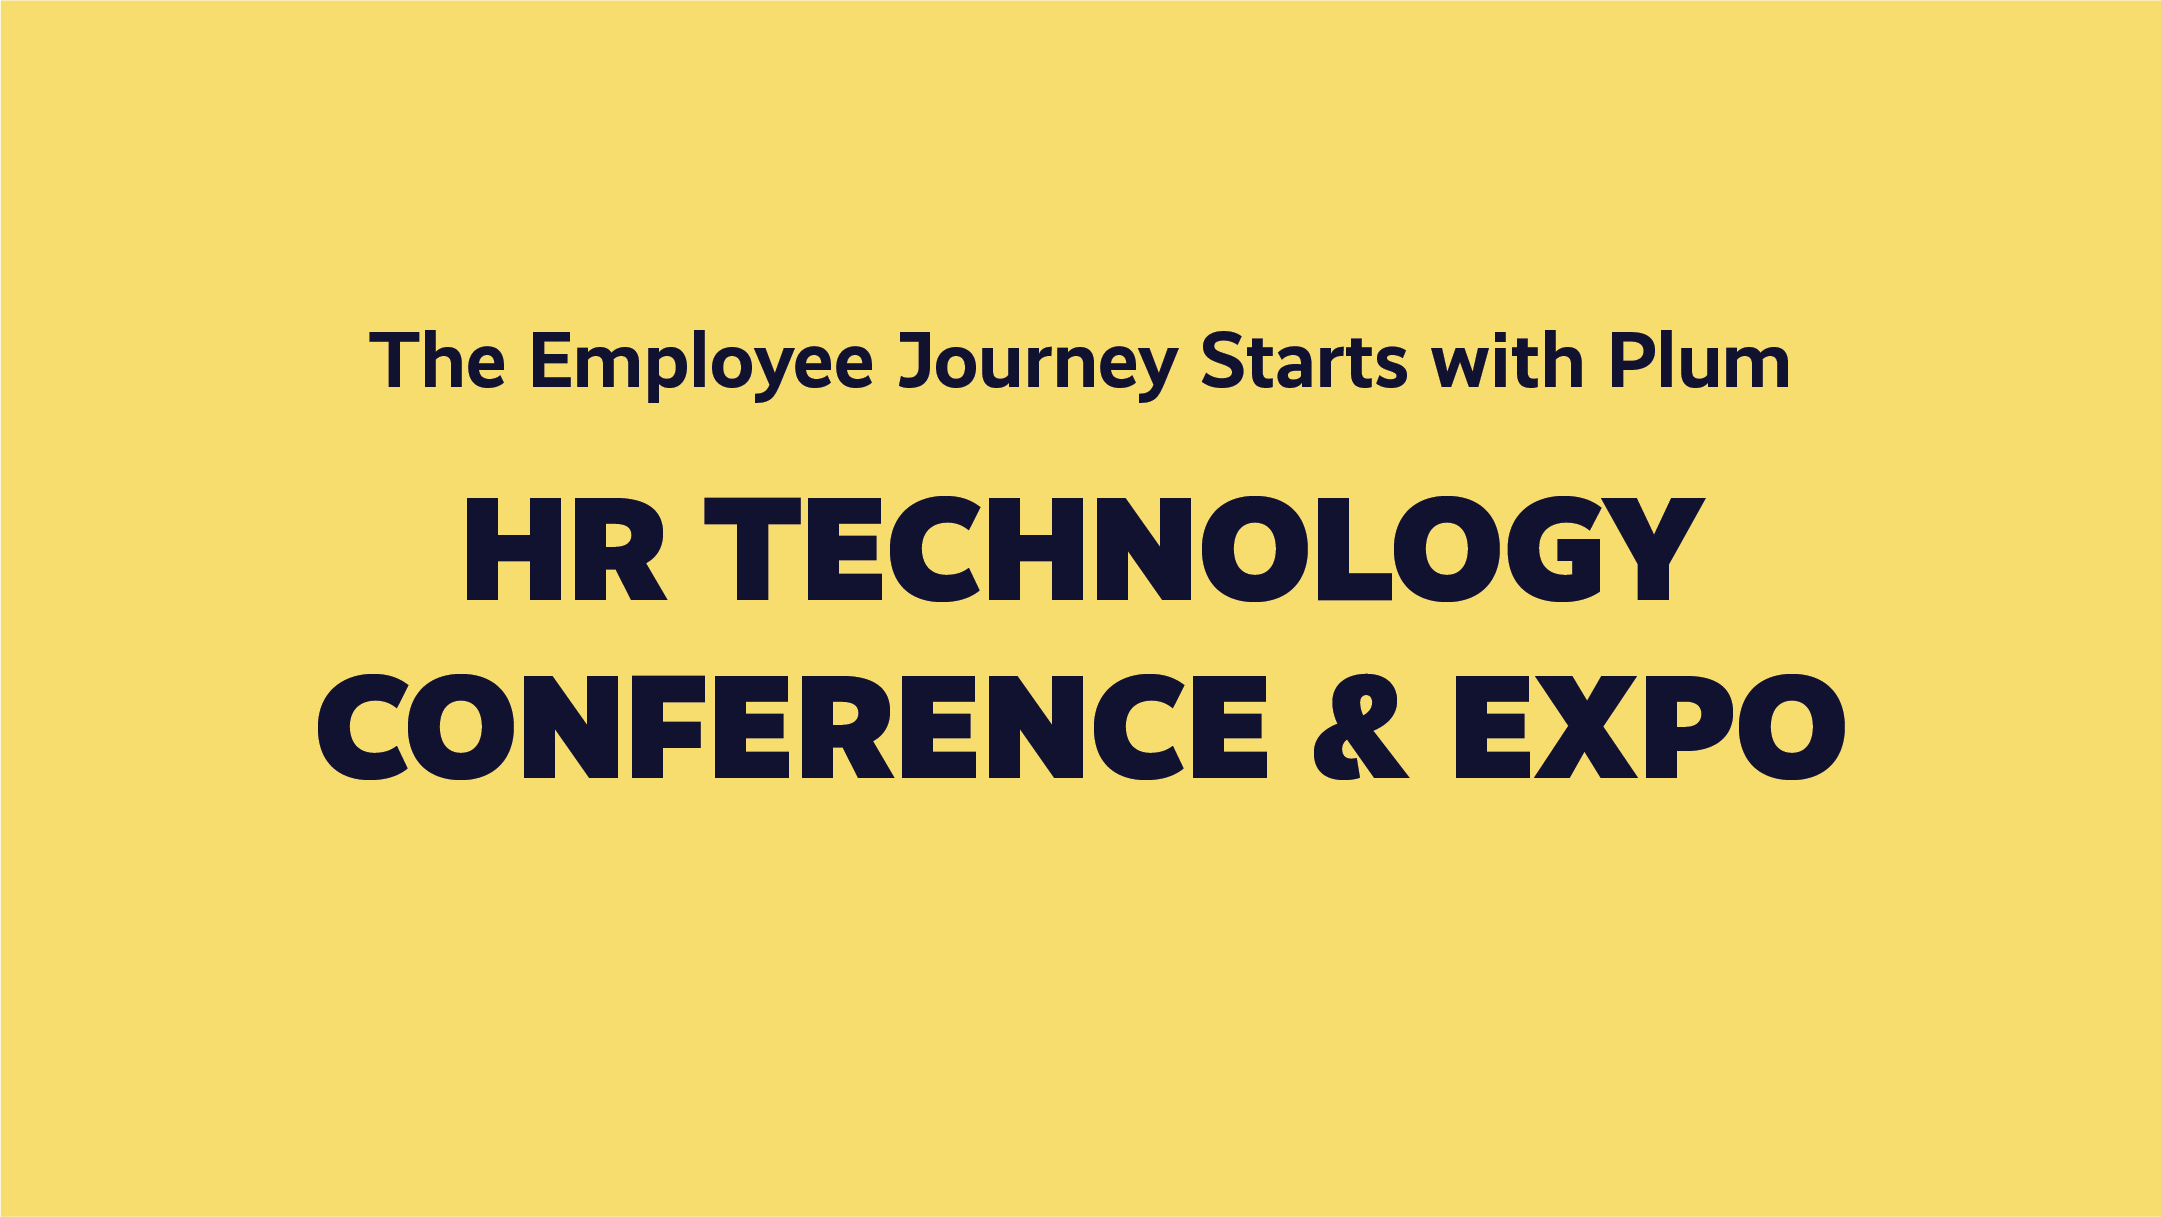 The Employee Journey Starts with Plum: Learn More at the Upcoming HR Technology Conference & Exposition